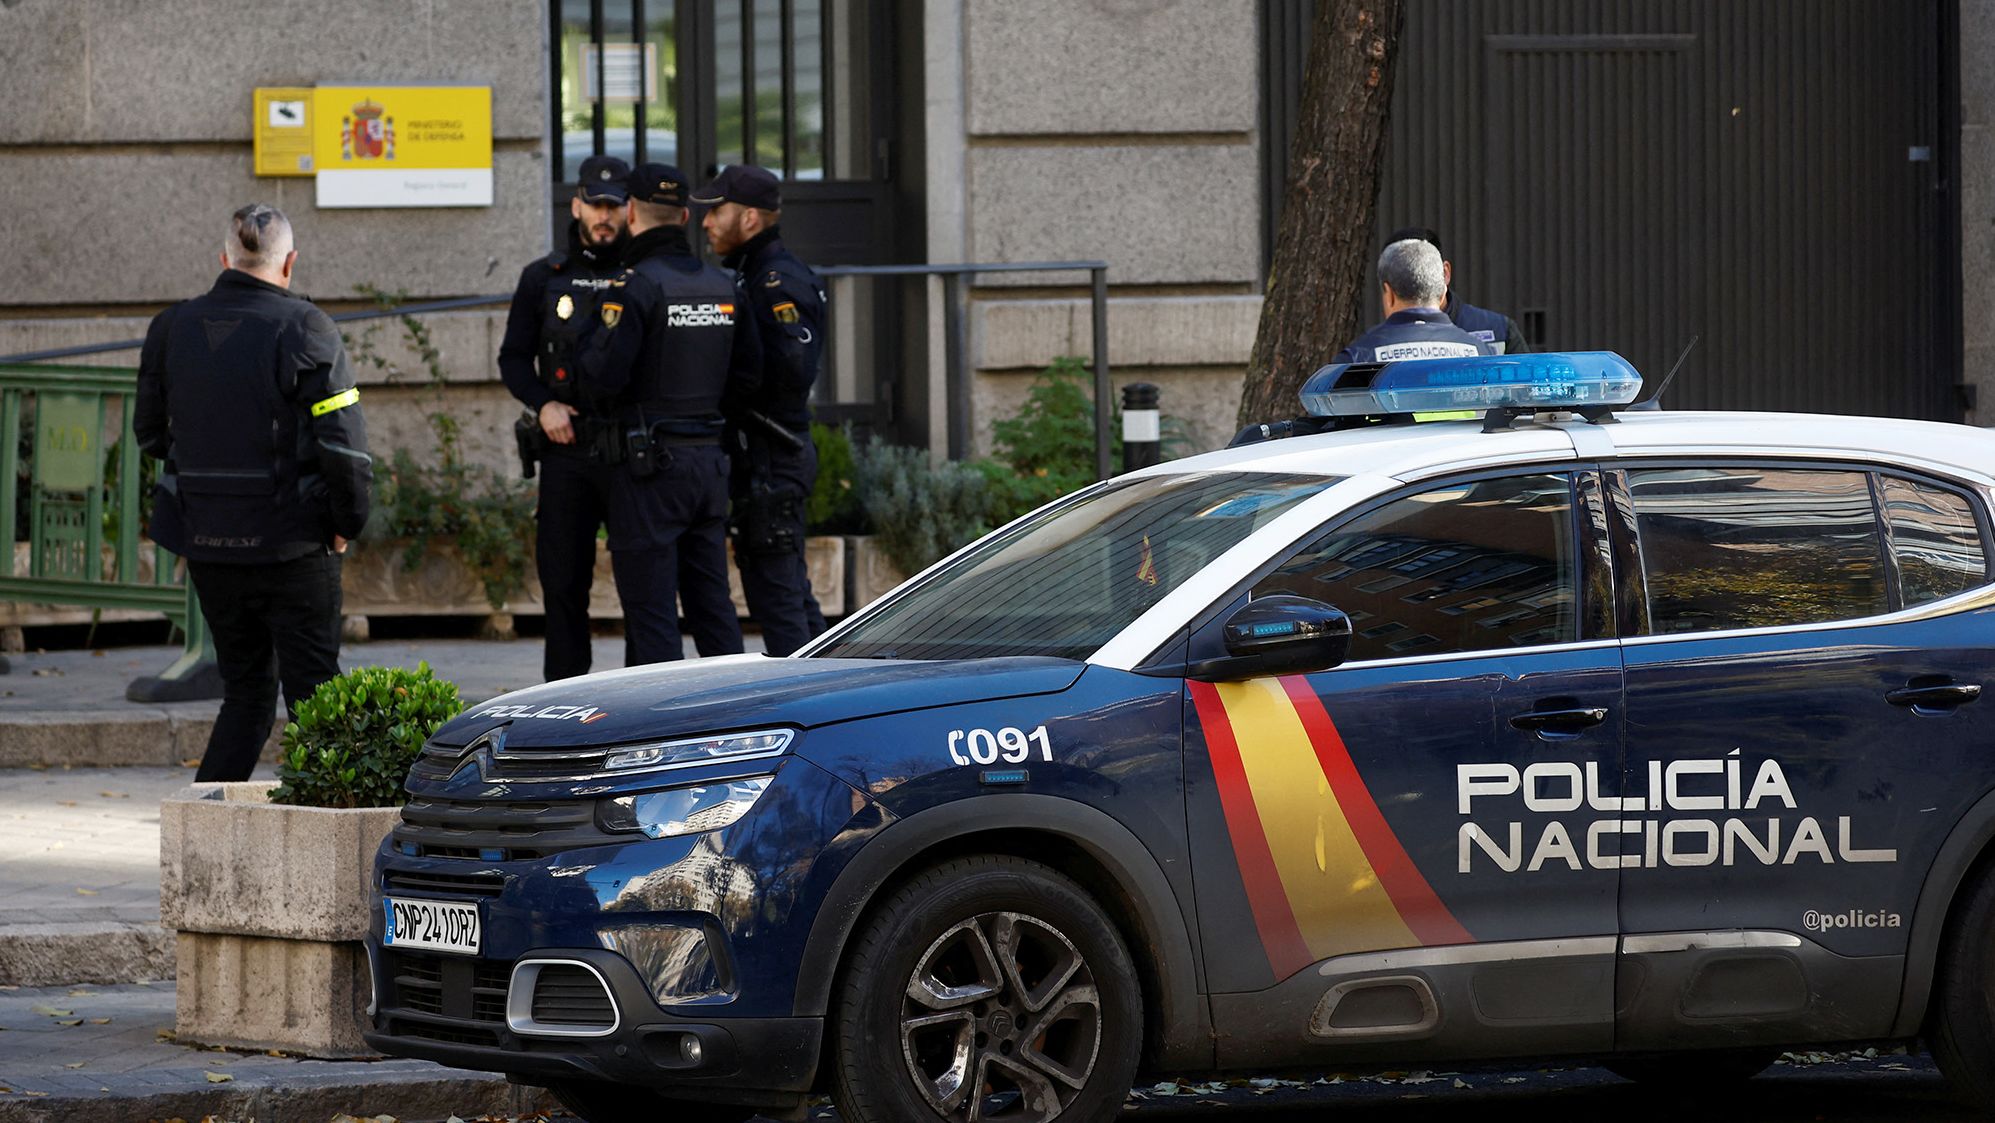 Police officers stand outside Spain's defense ministry after suspected explosive devices hidden in envelopes were mailed to the building, officials said.